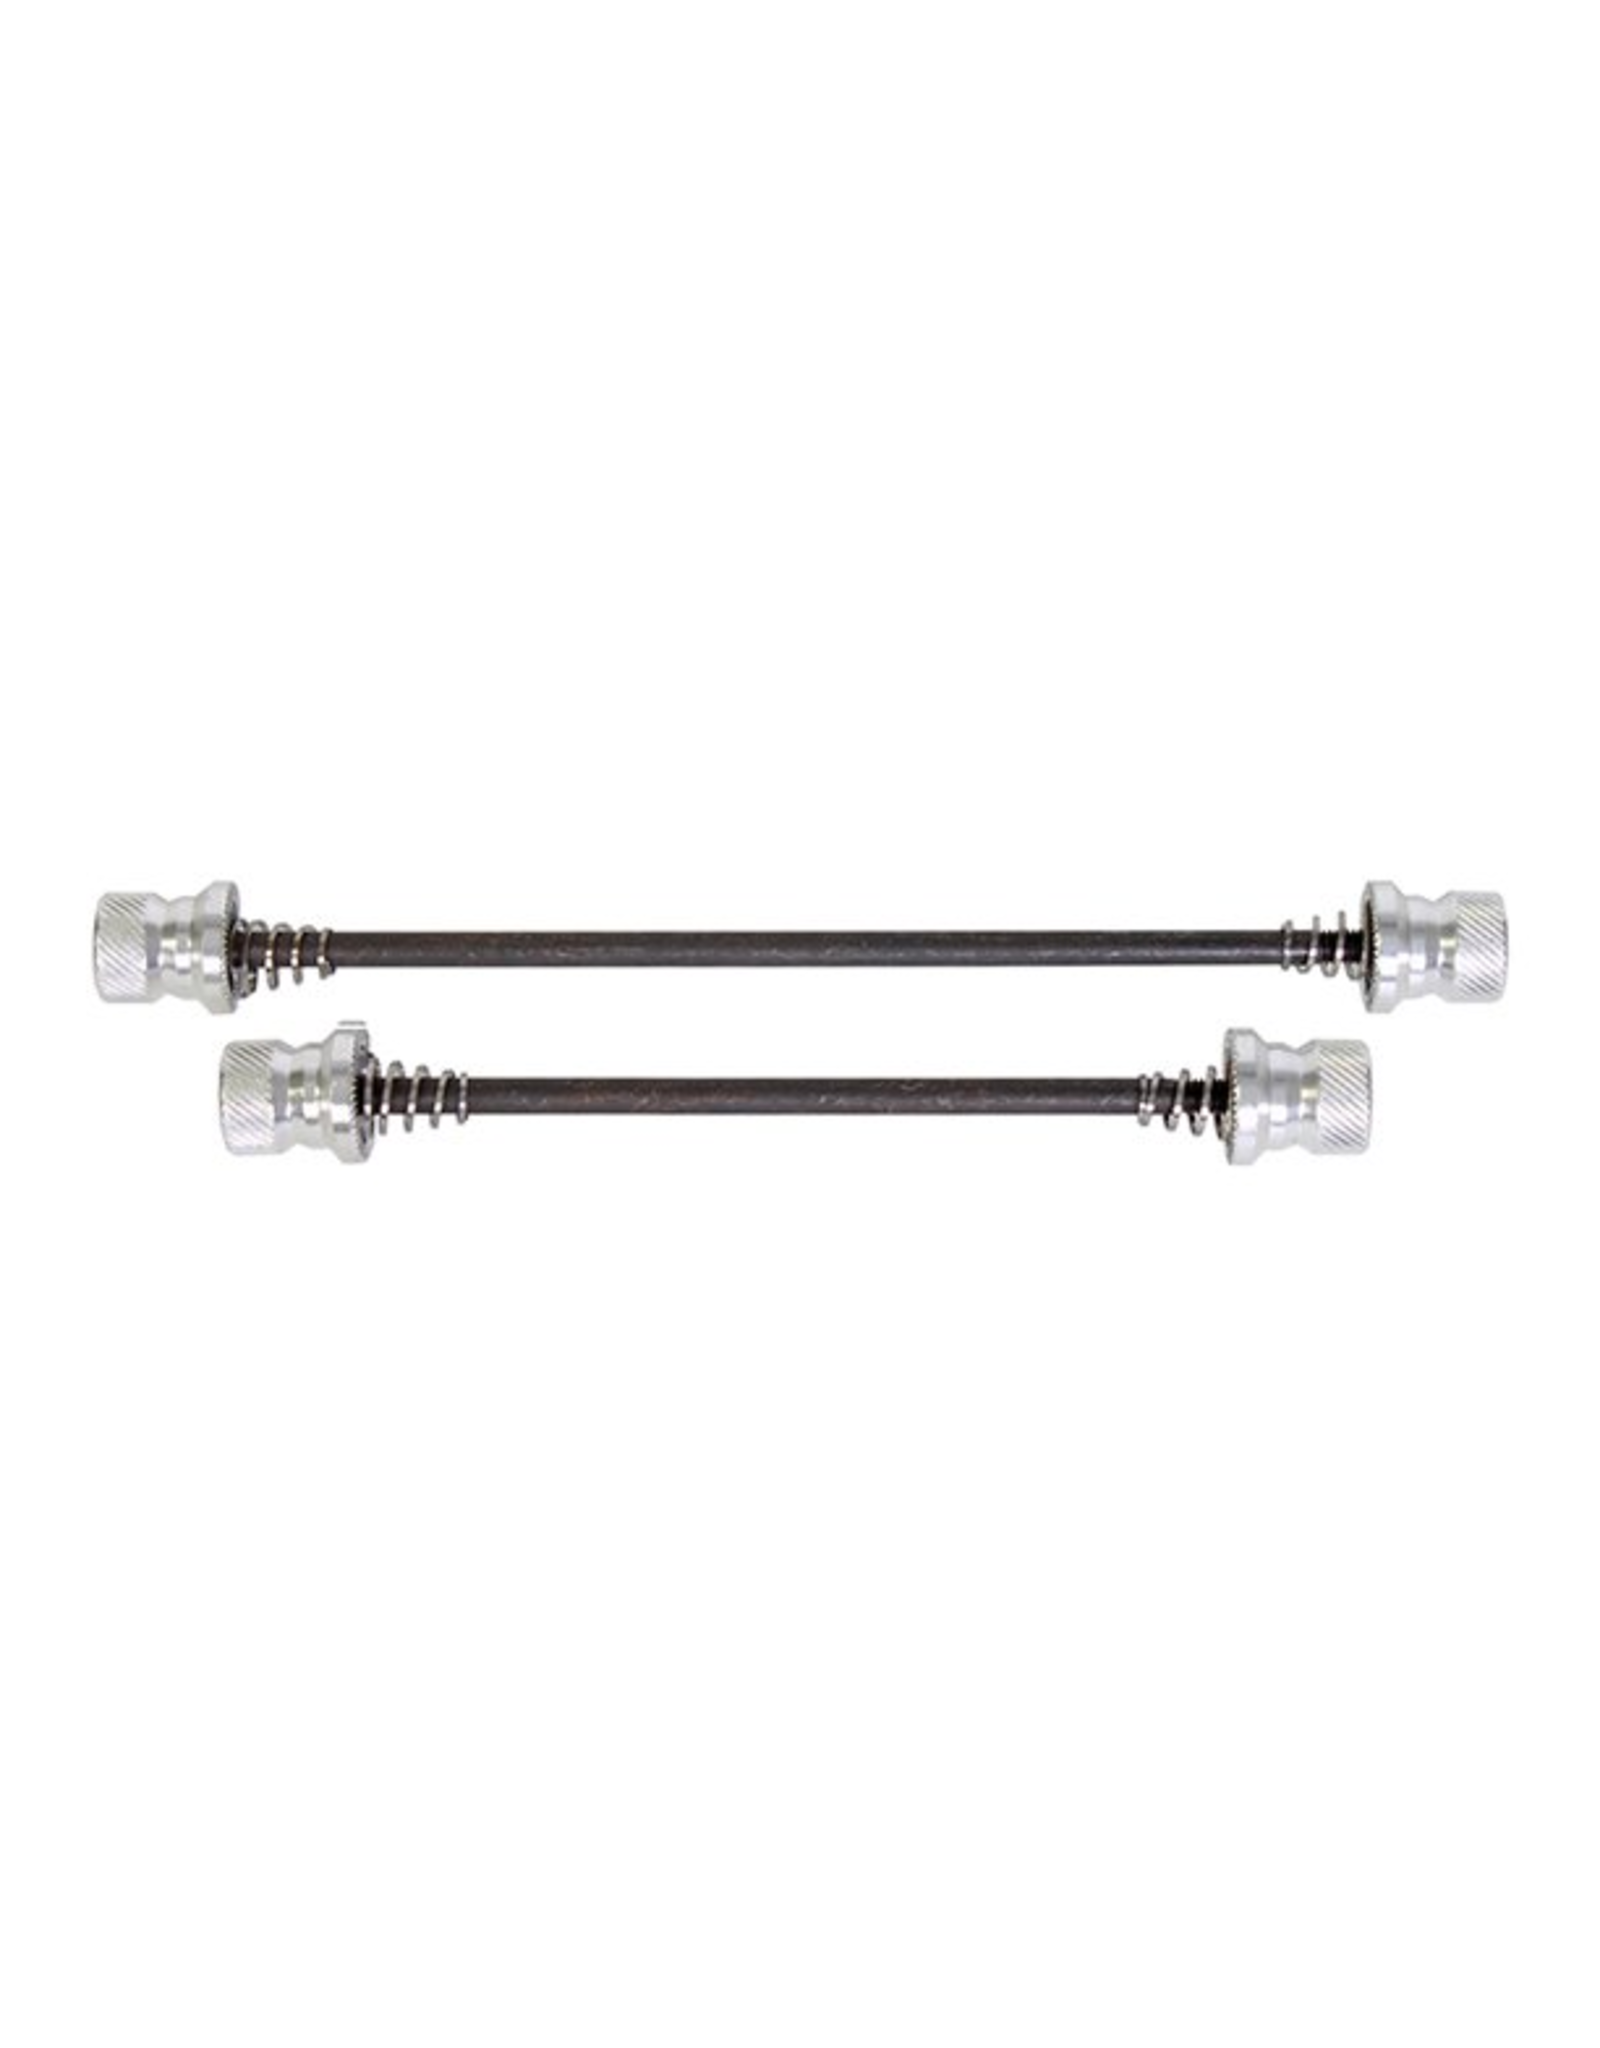 Skewers, Anti-Theft, Sunlite 5mm Hex, 100mm FRONT/135mm REAR